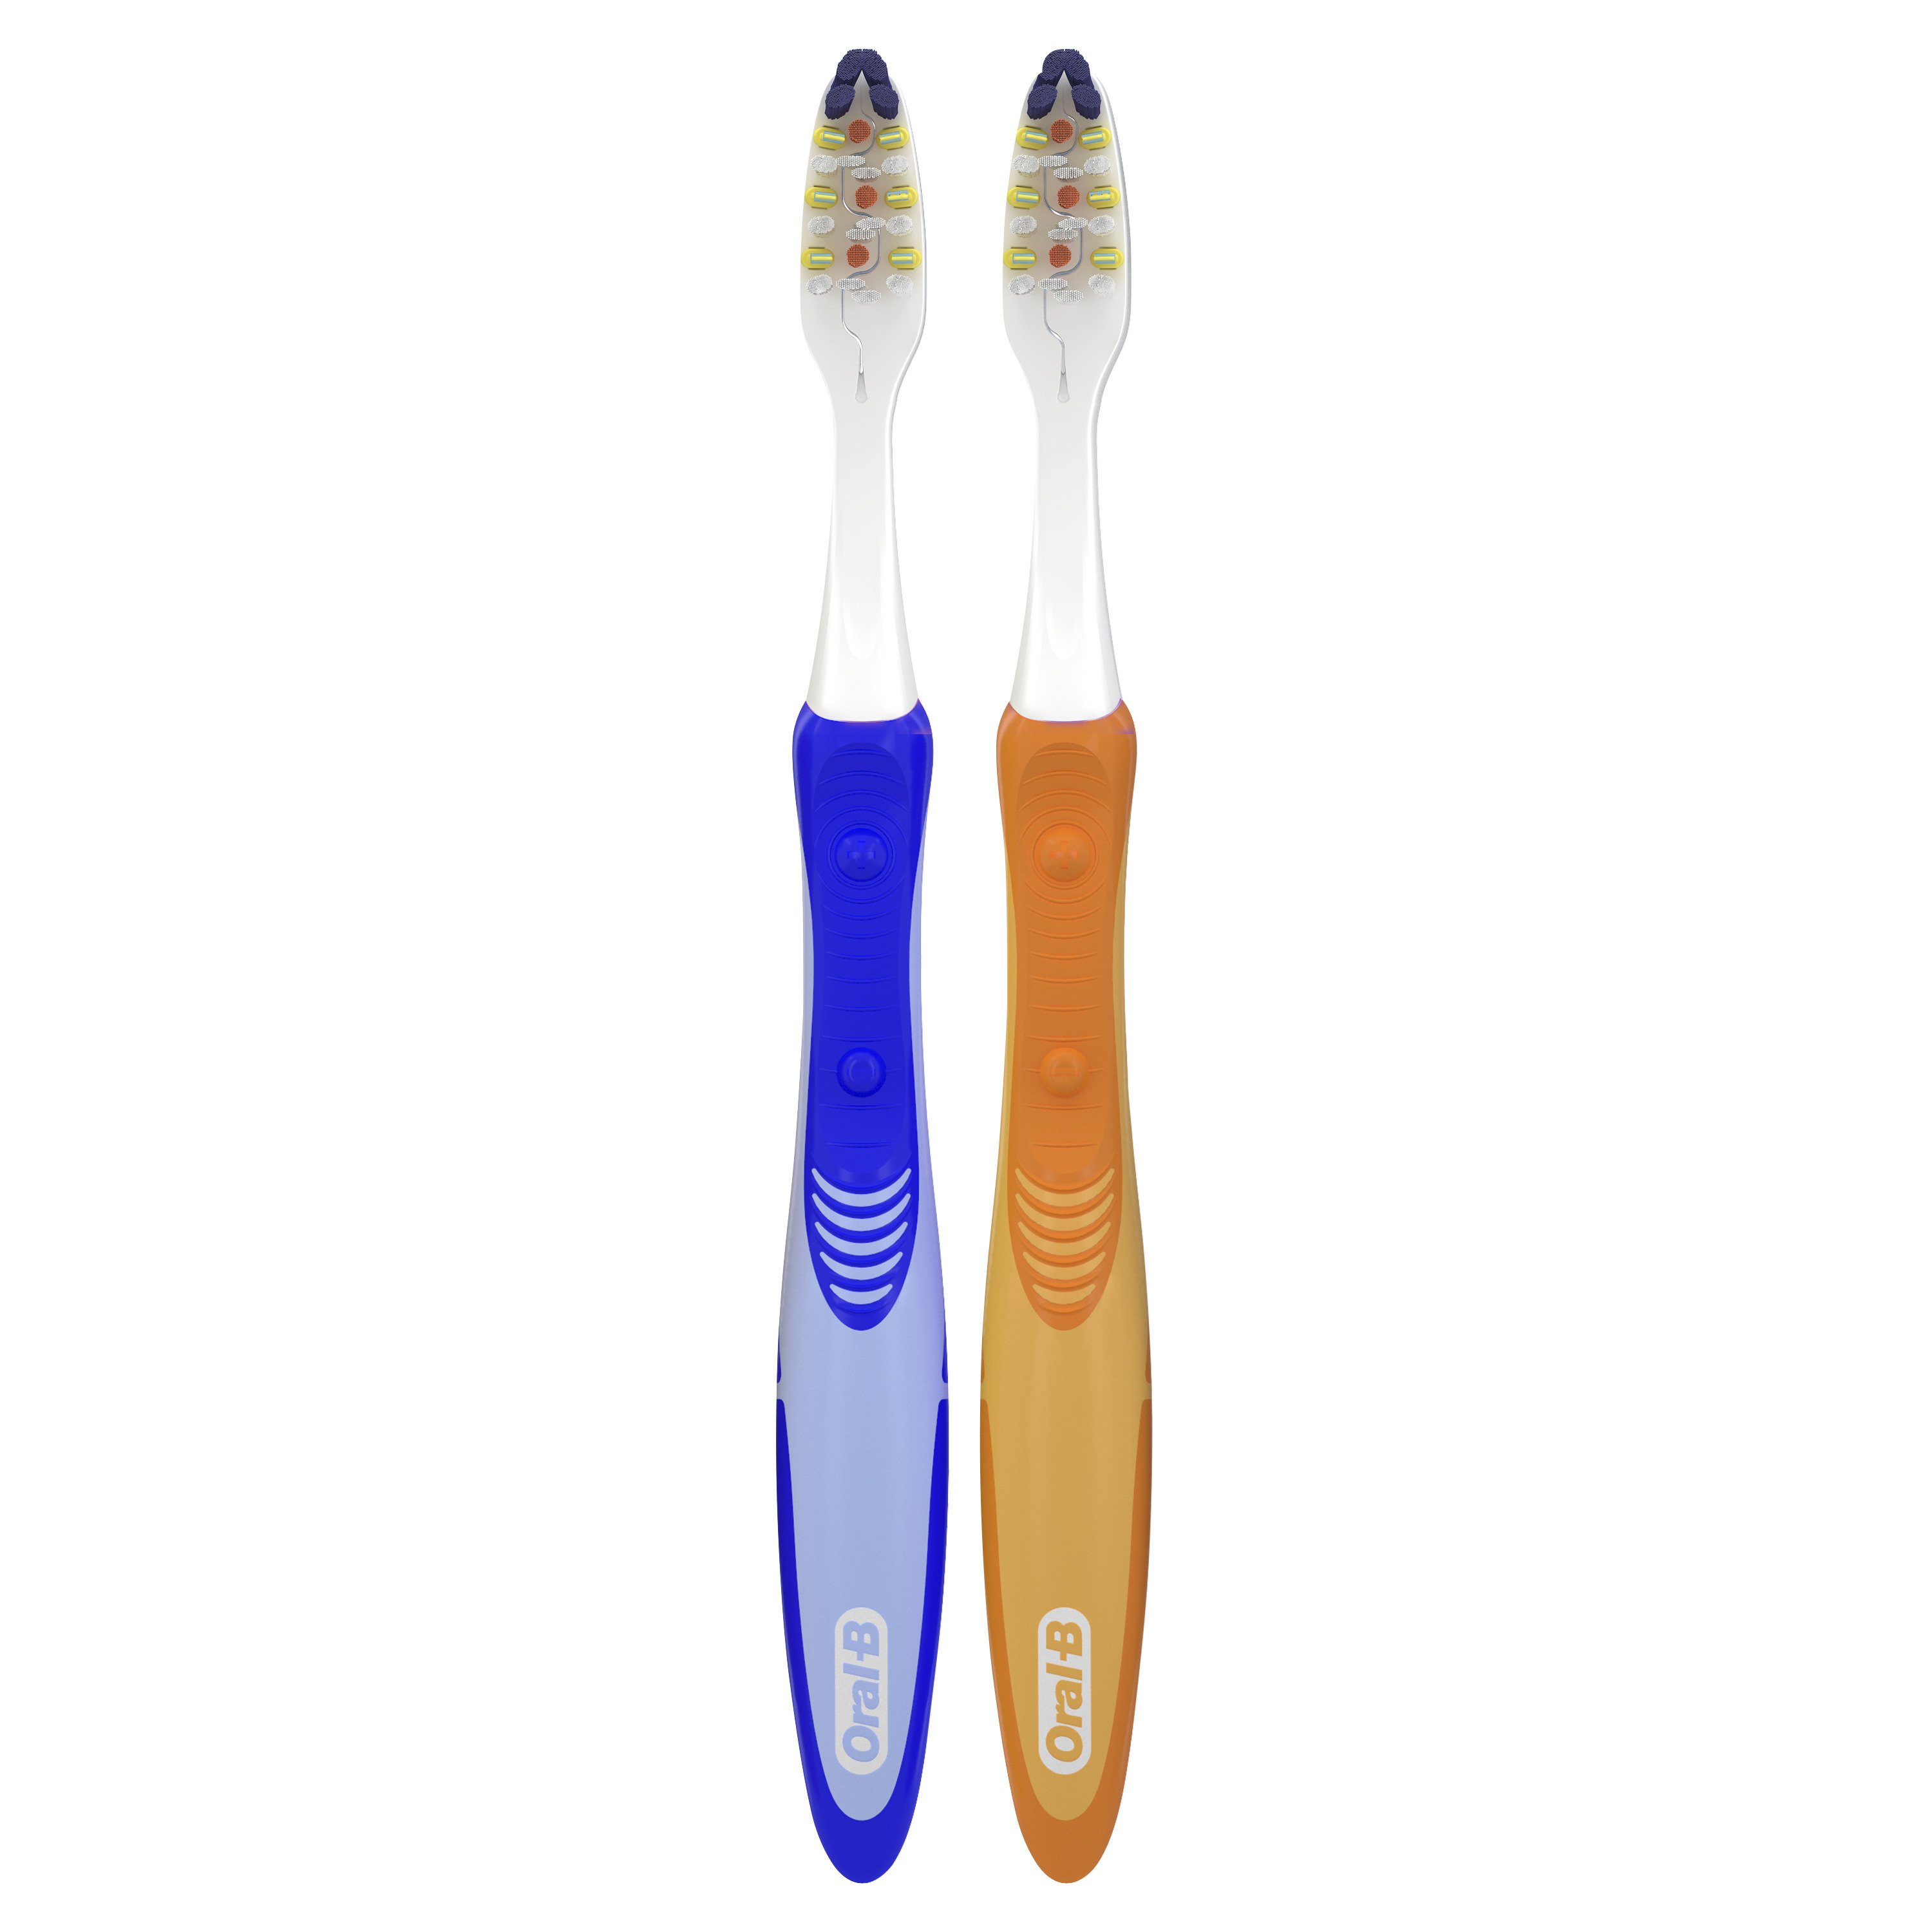 Oral-B Vibrating Pulsar Battery Toothbrushes, Full Head, Medium, 2 Count, for Adults and Children 3+ - image 2 of 10